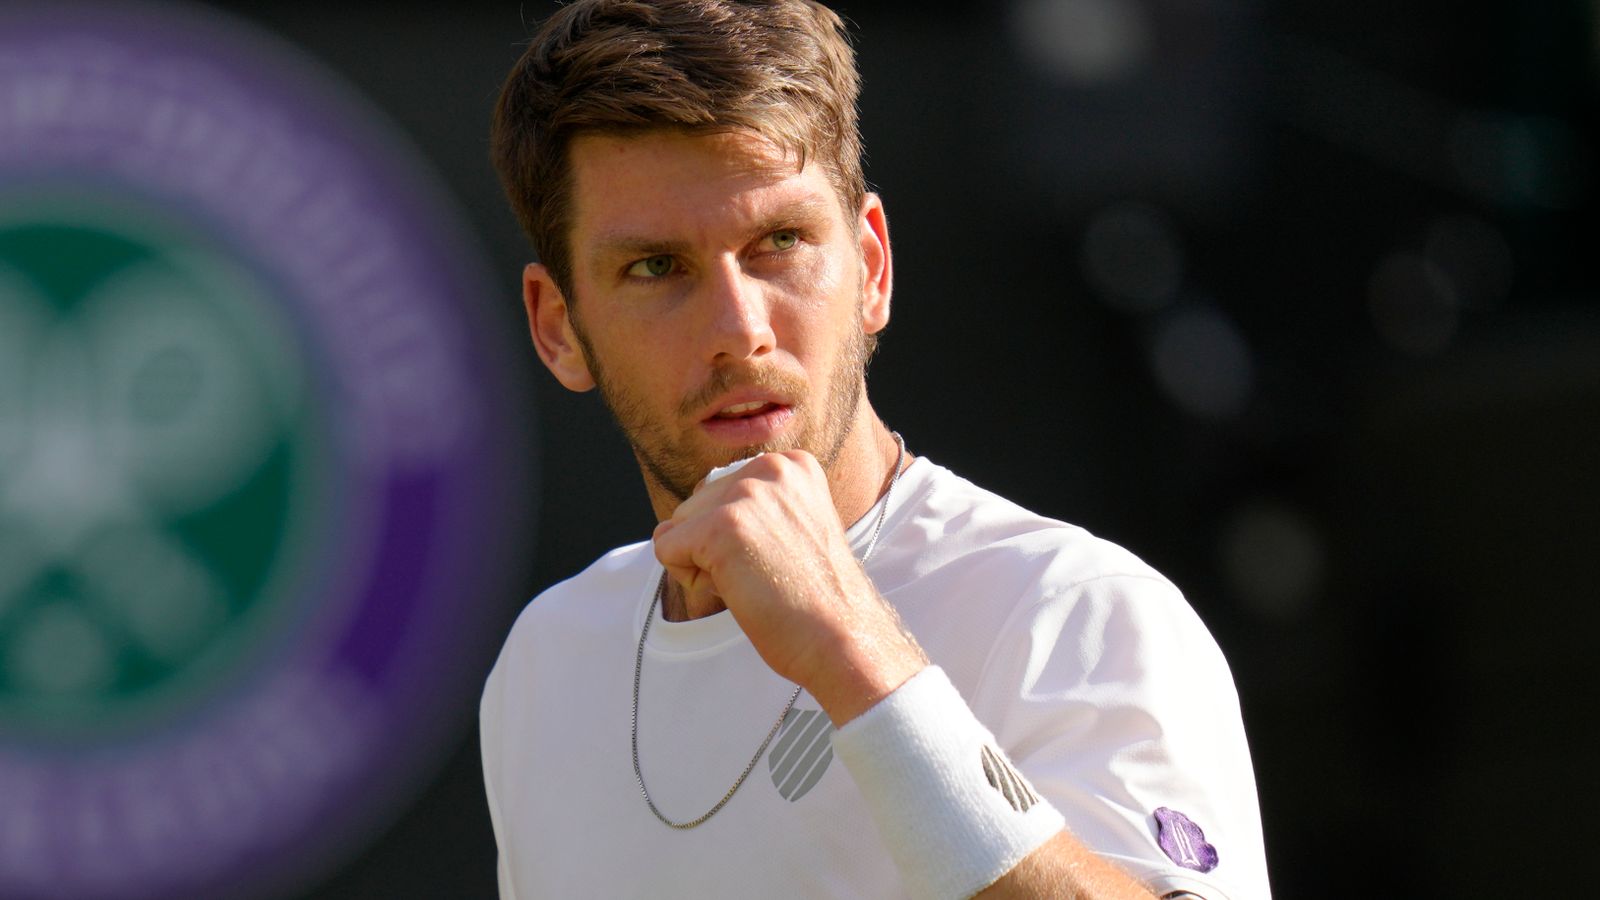 Cameron Norrie aiming for Grand Slam title after his ‘pretty sick’ Wimbledon run ended by Novak Djokovic | Tennis News